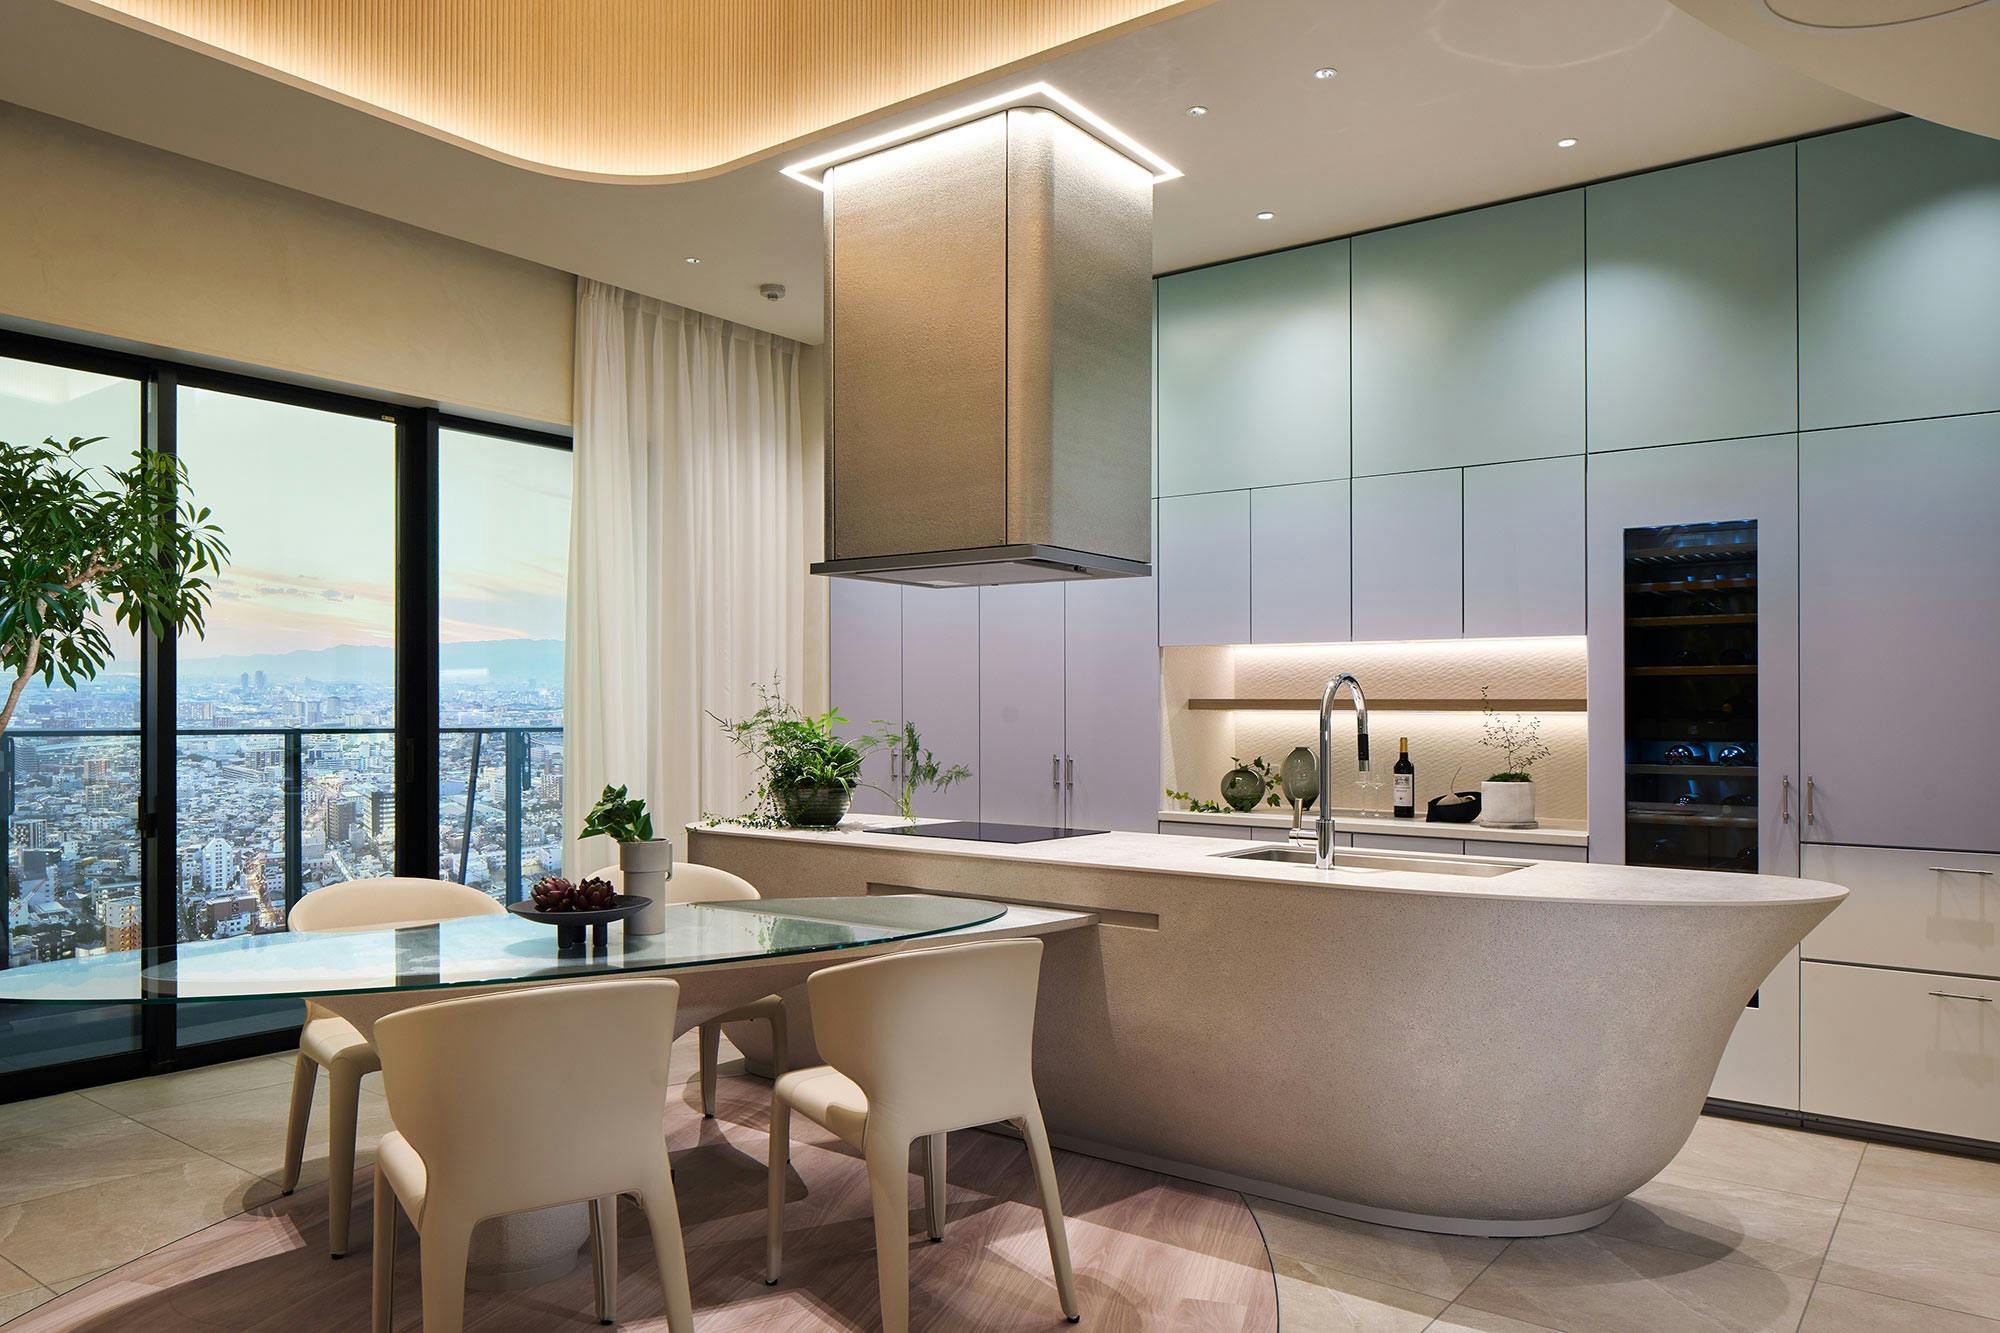 Numéro d'image 42 de la section actuelle de DKTN Sirius adds a welcoming touch to the kitchens of a residential development in Dubai de Cosentino France